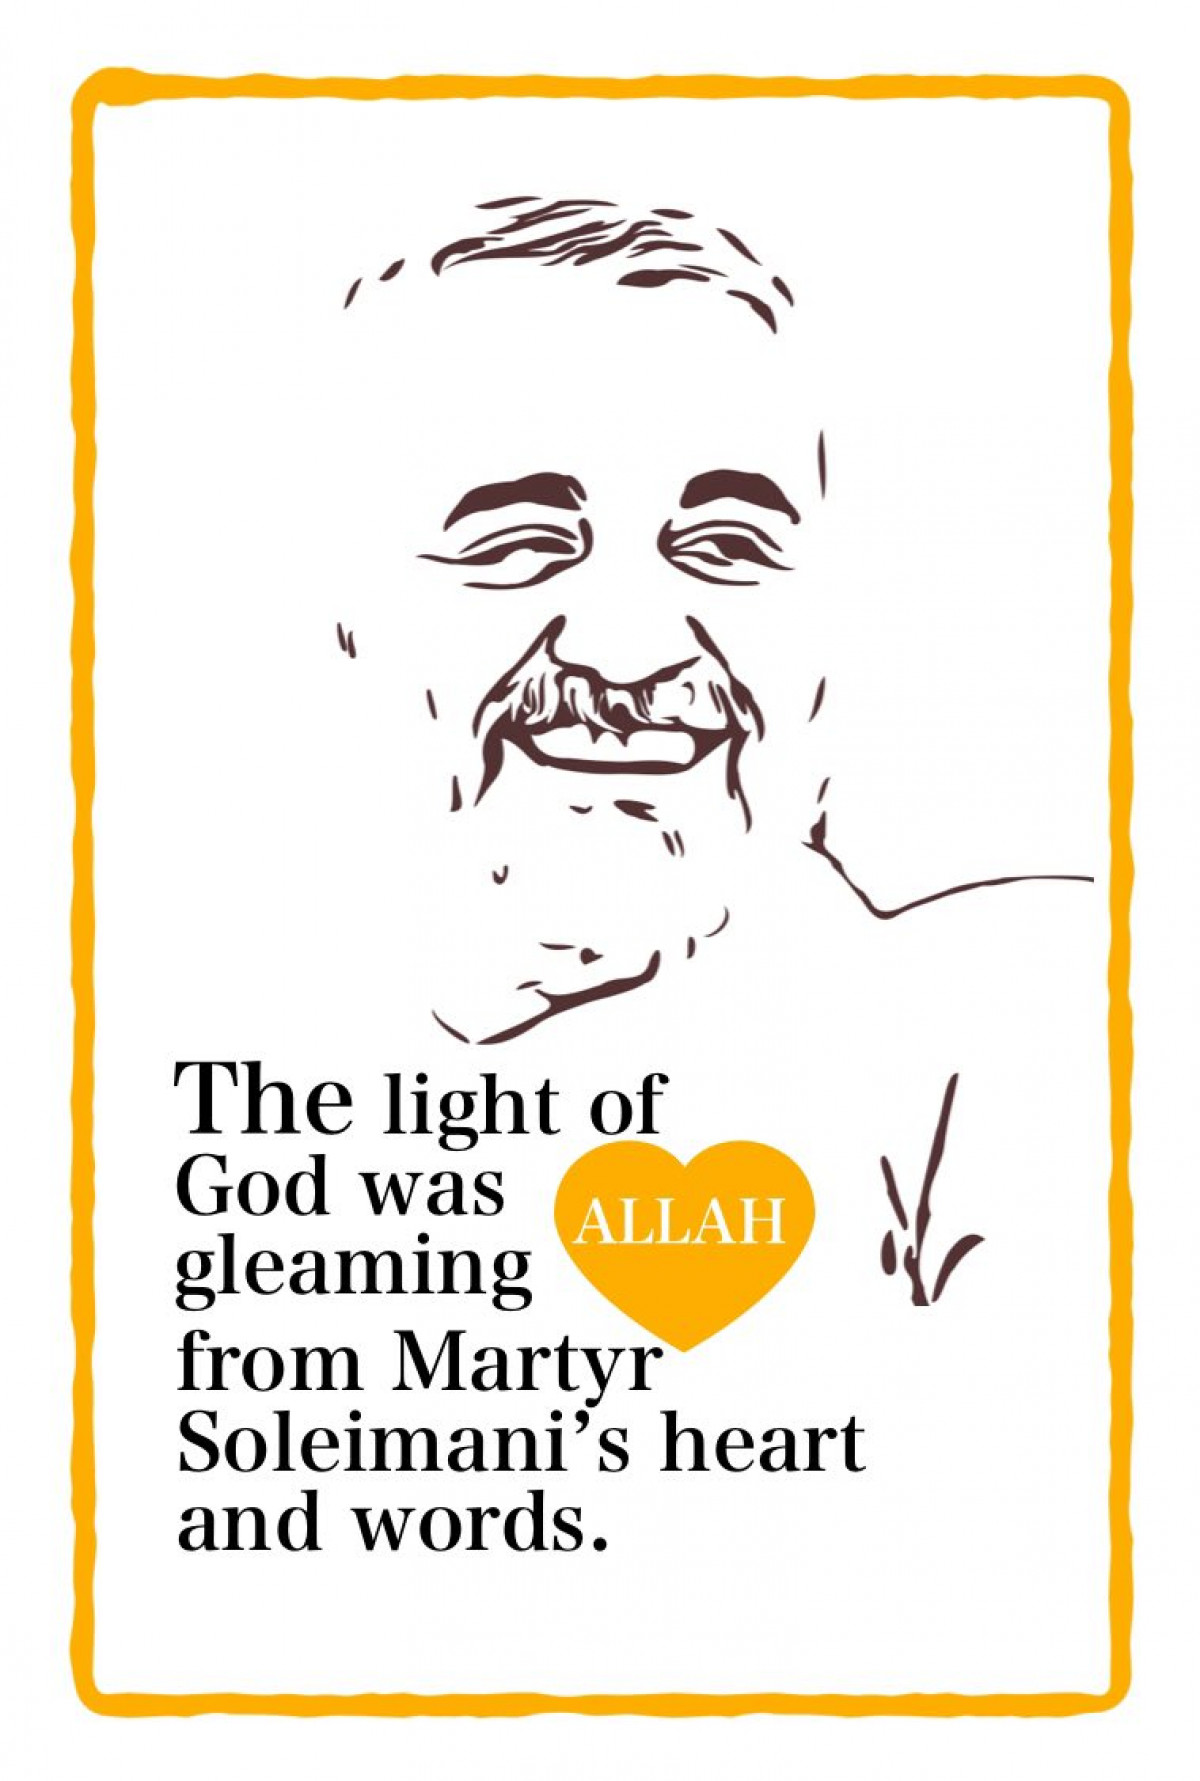 The light of God was gleaming from martyr Soleimani's heart and words